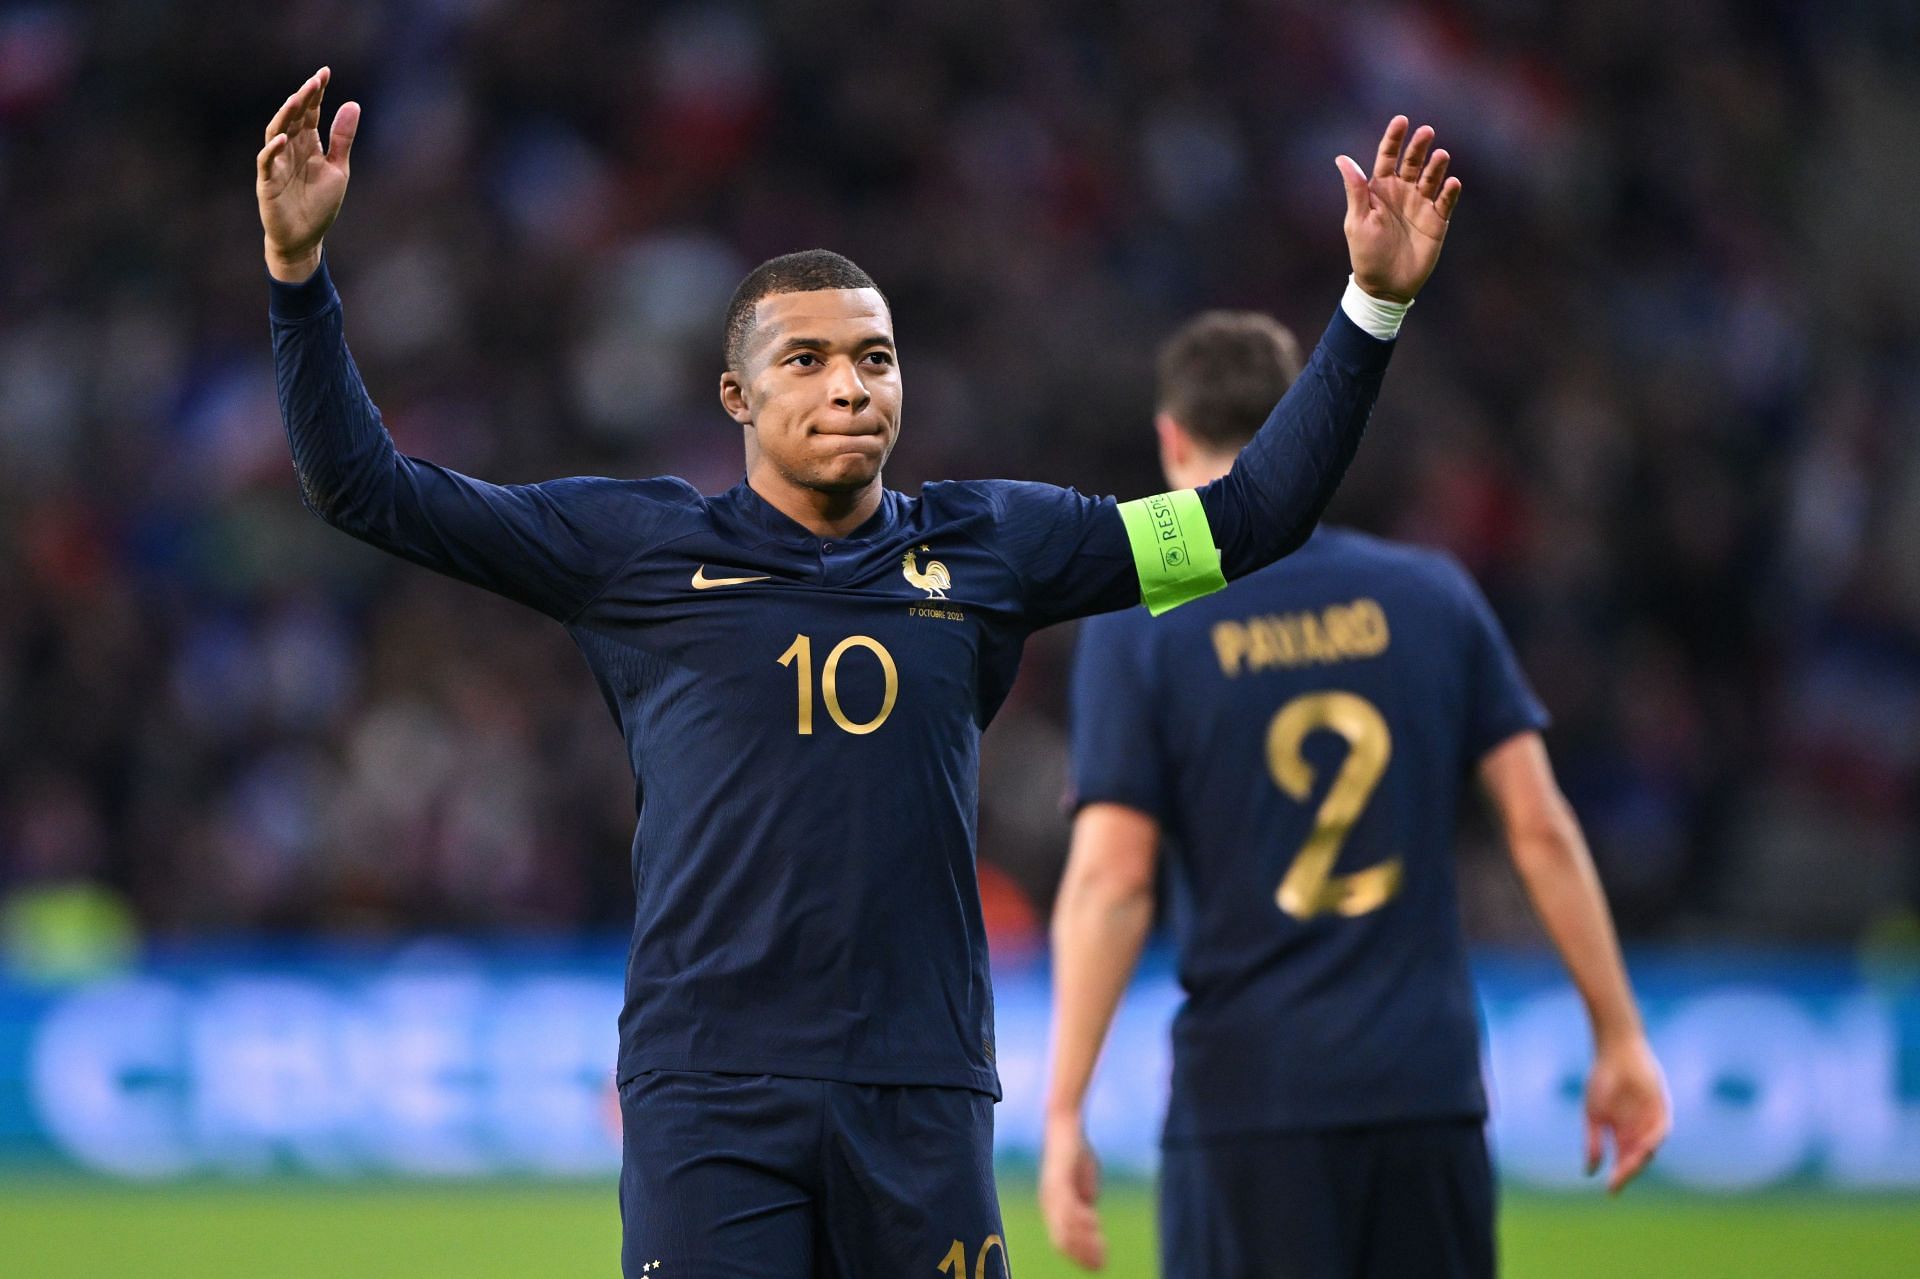 The France captain has bagged 300 goals quicker than Lionel Messi and Cristiano Ronaldo.